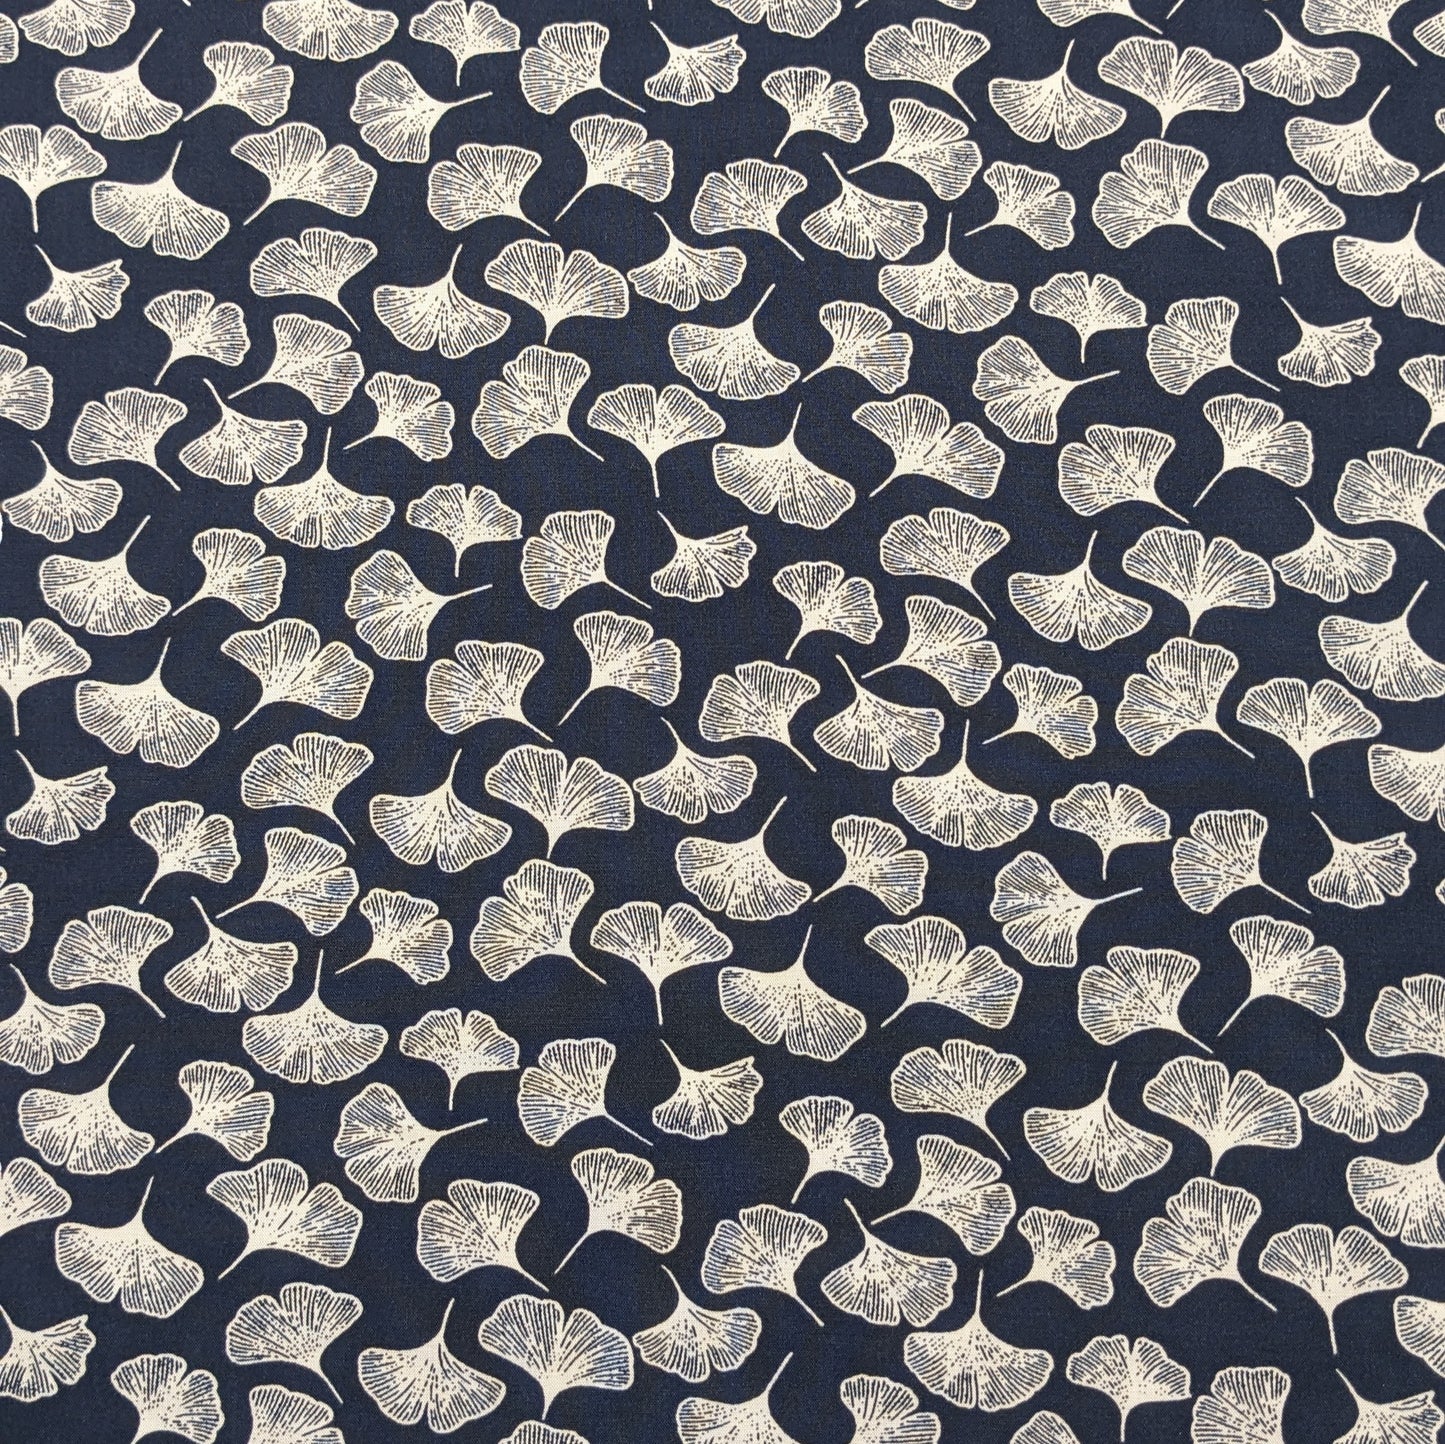 Viscose Fabric - Ginkgo Leaves on Navy